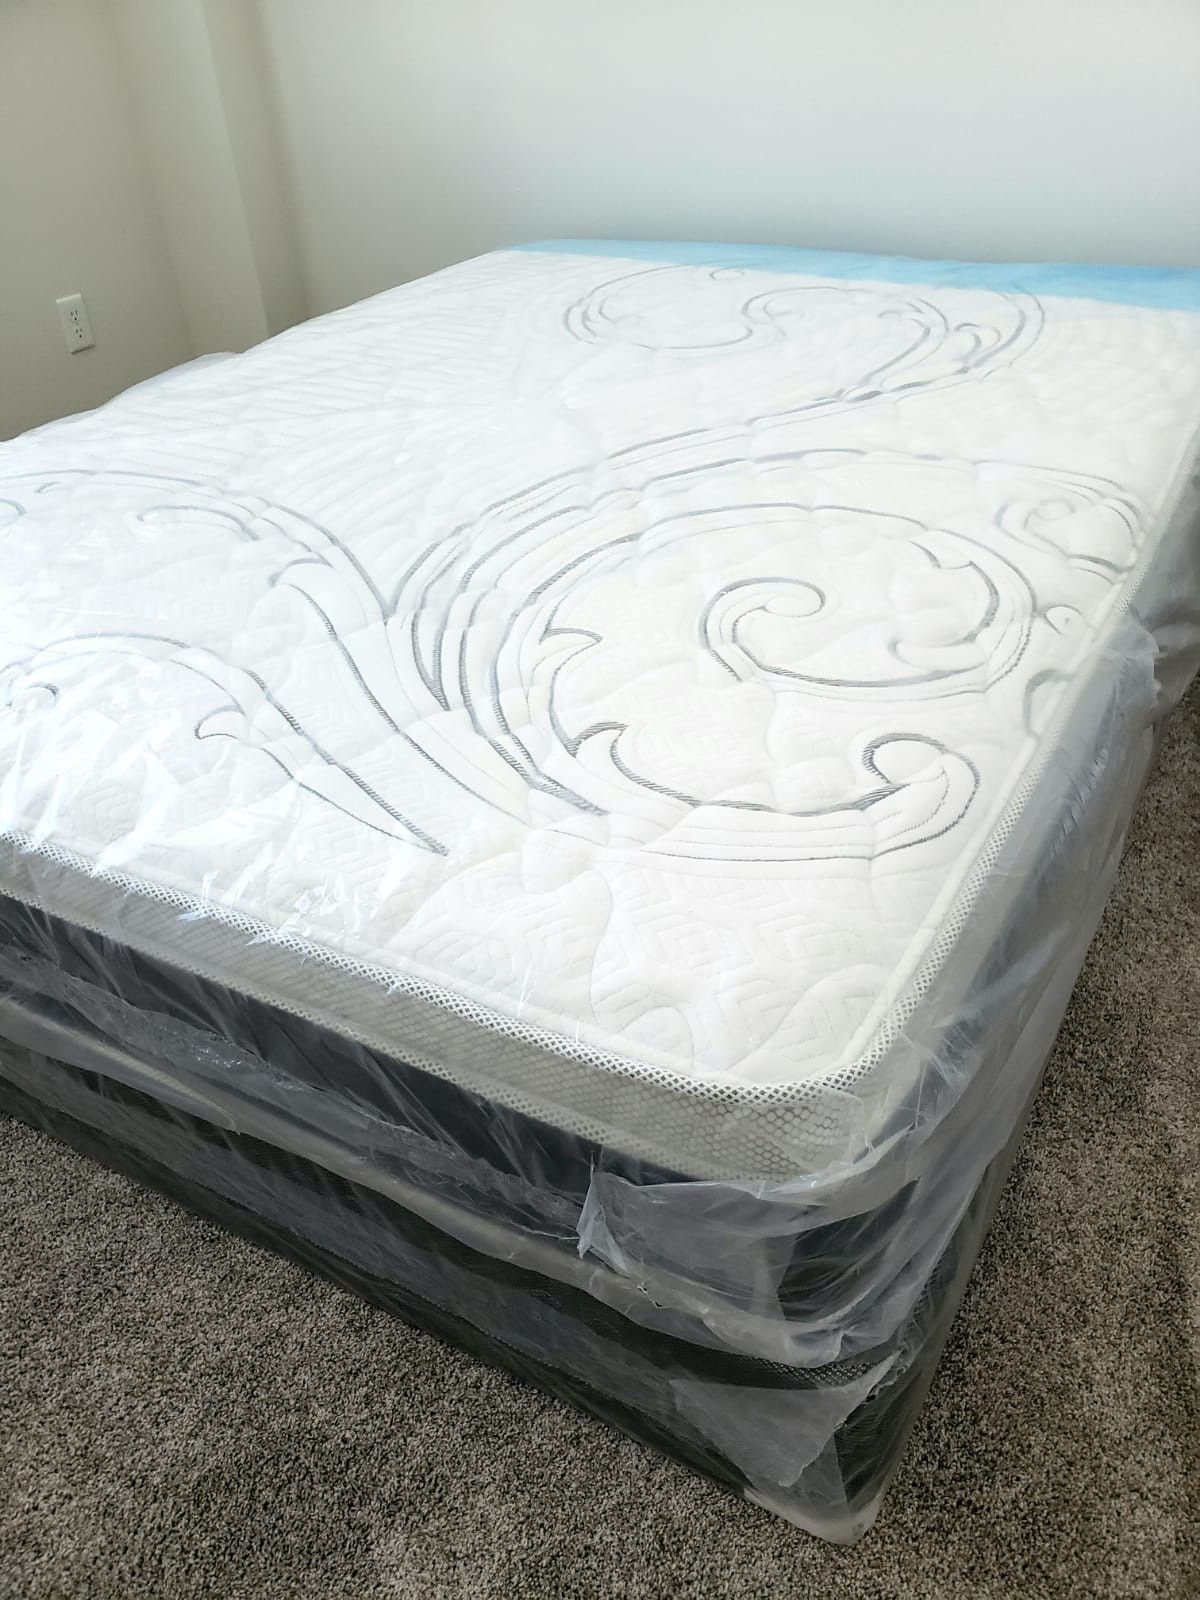 NEW QUEEN PILLOW TOP MATTRESS WITH BOX SPRING. Bed frame is not available. Take it home the same day 👍